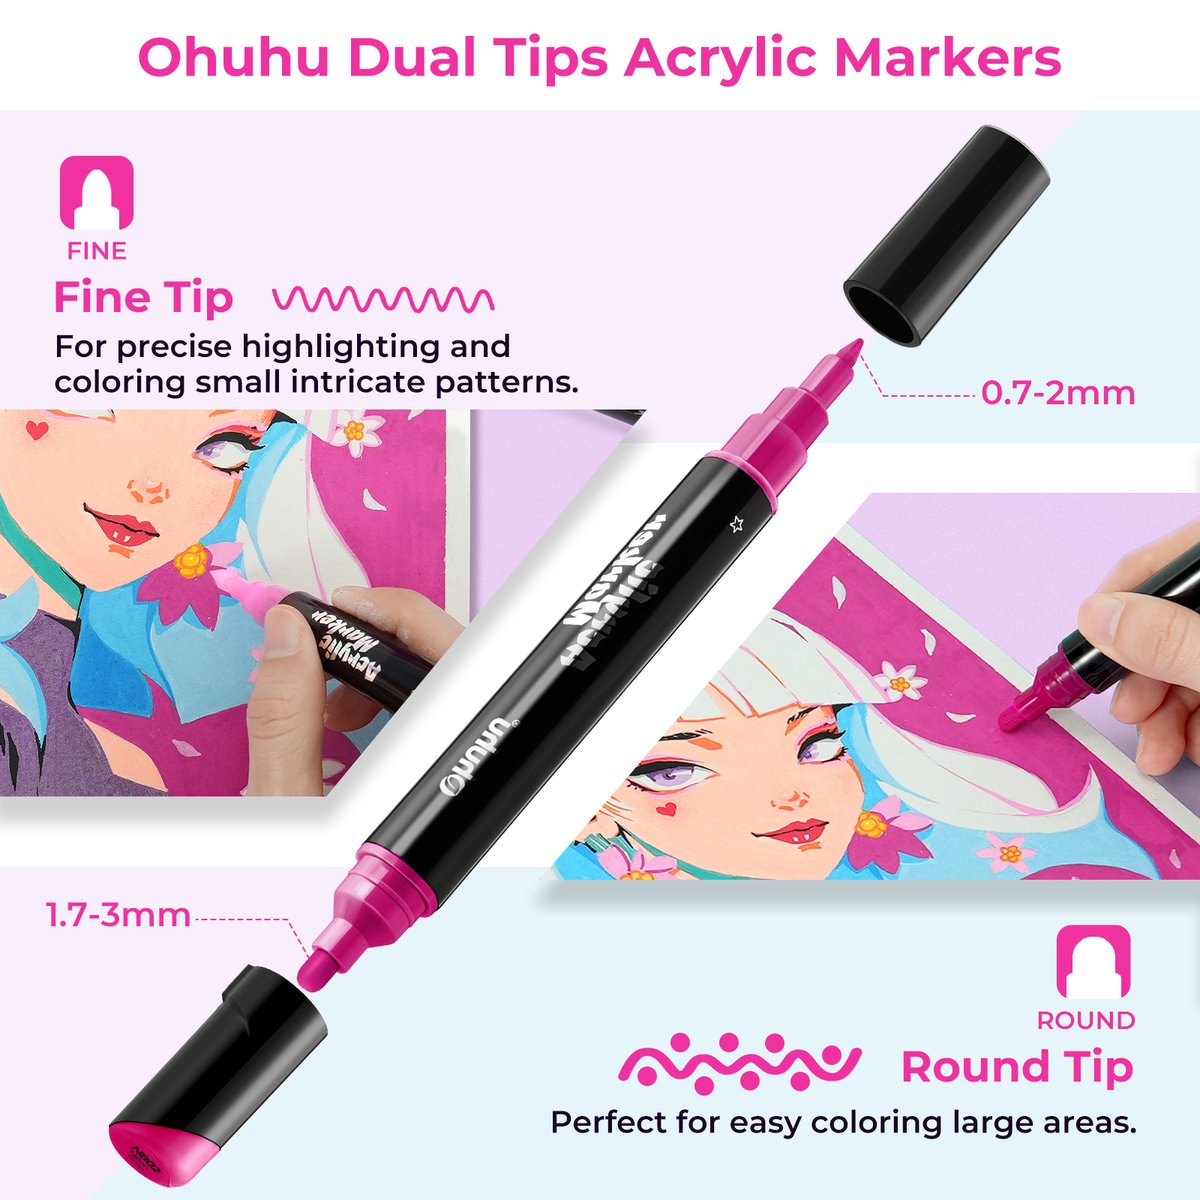 🚀Exciting News! 🎨 Introducing the NEW Ohuhu 30 Colors Acrylic Paint Pens! Get ready to elevate your artwork with our latest innovation. 😍Welcome Our new Ohuhu art partner on May 15th! 🙌Does there anyone want to try out it first?🤩 #Ohuhu #OhuhuAcrylic